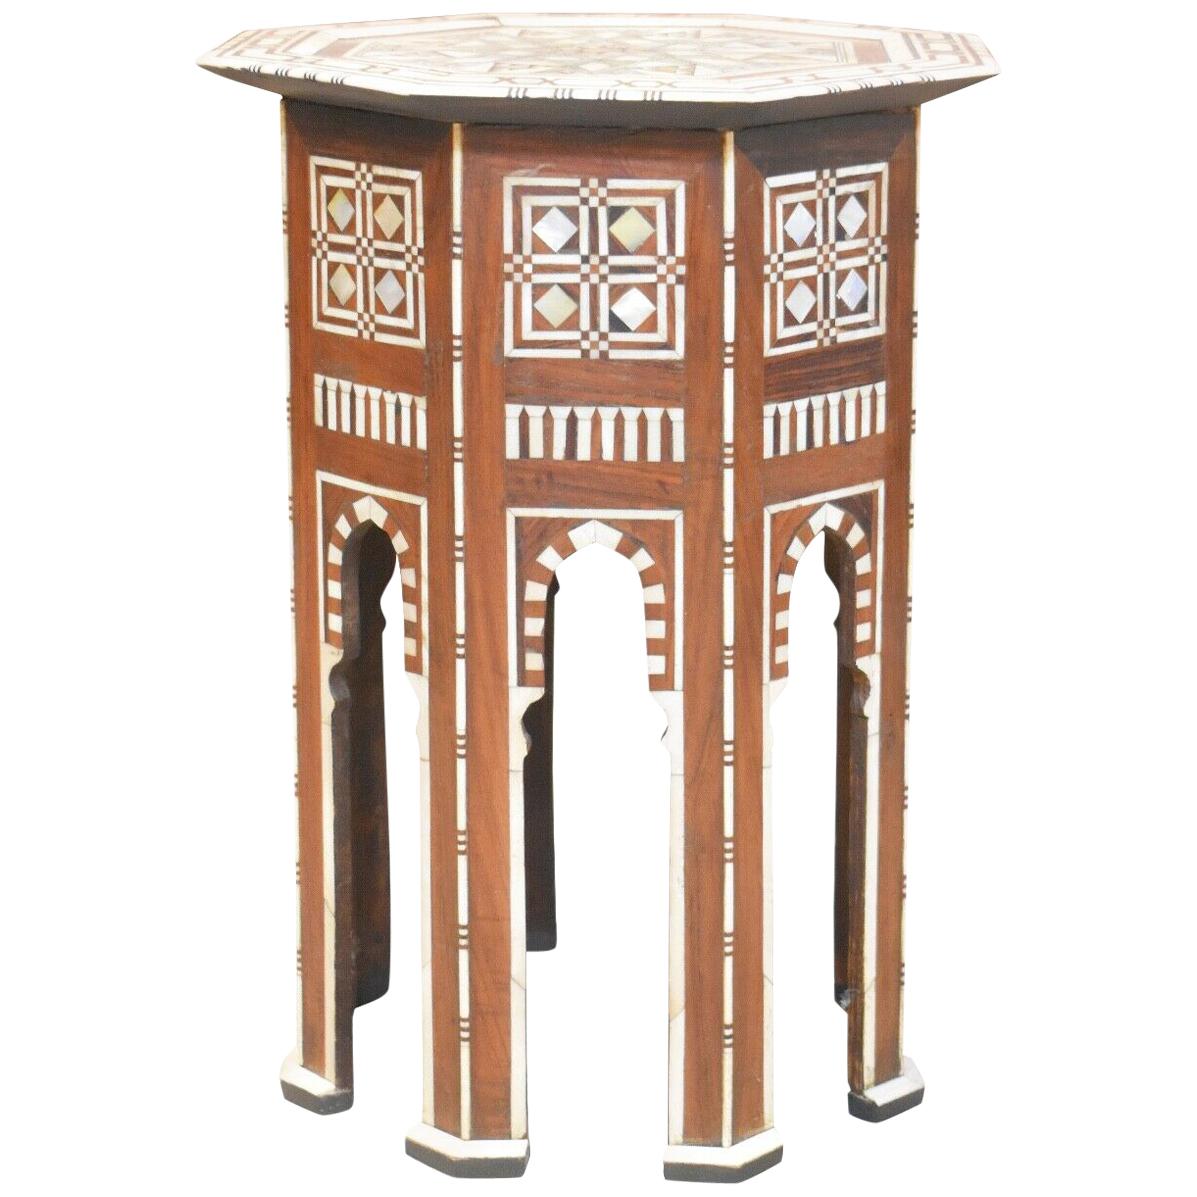 Islamic Hexagonal Occasional Table with Mother of Pearl Inlay